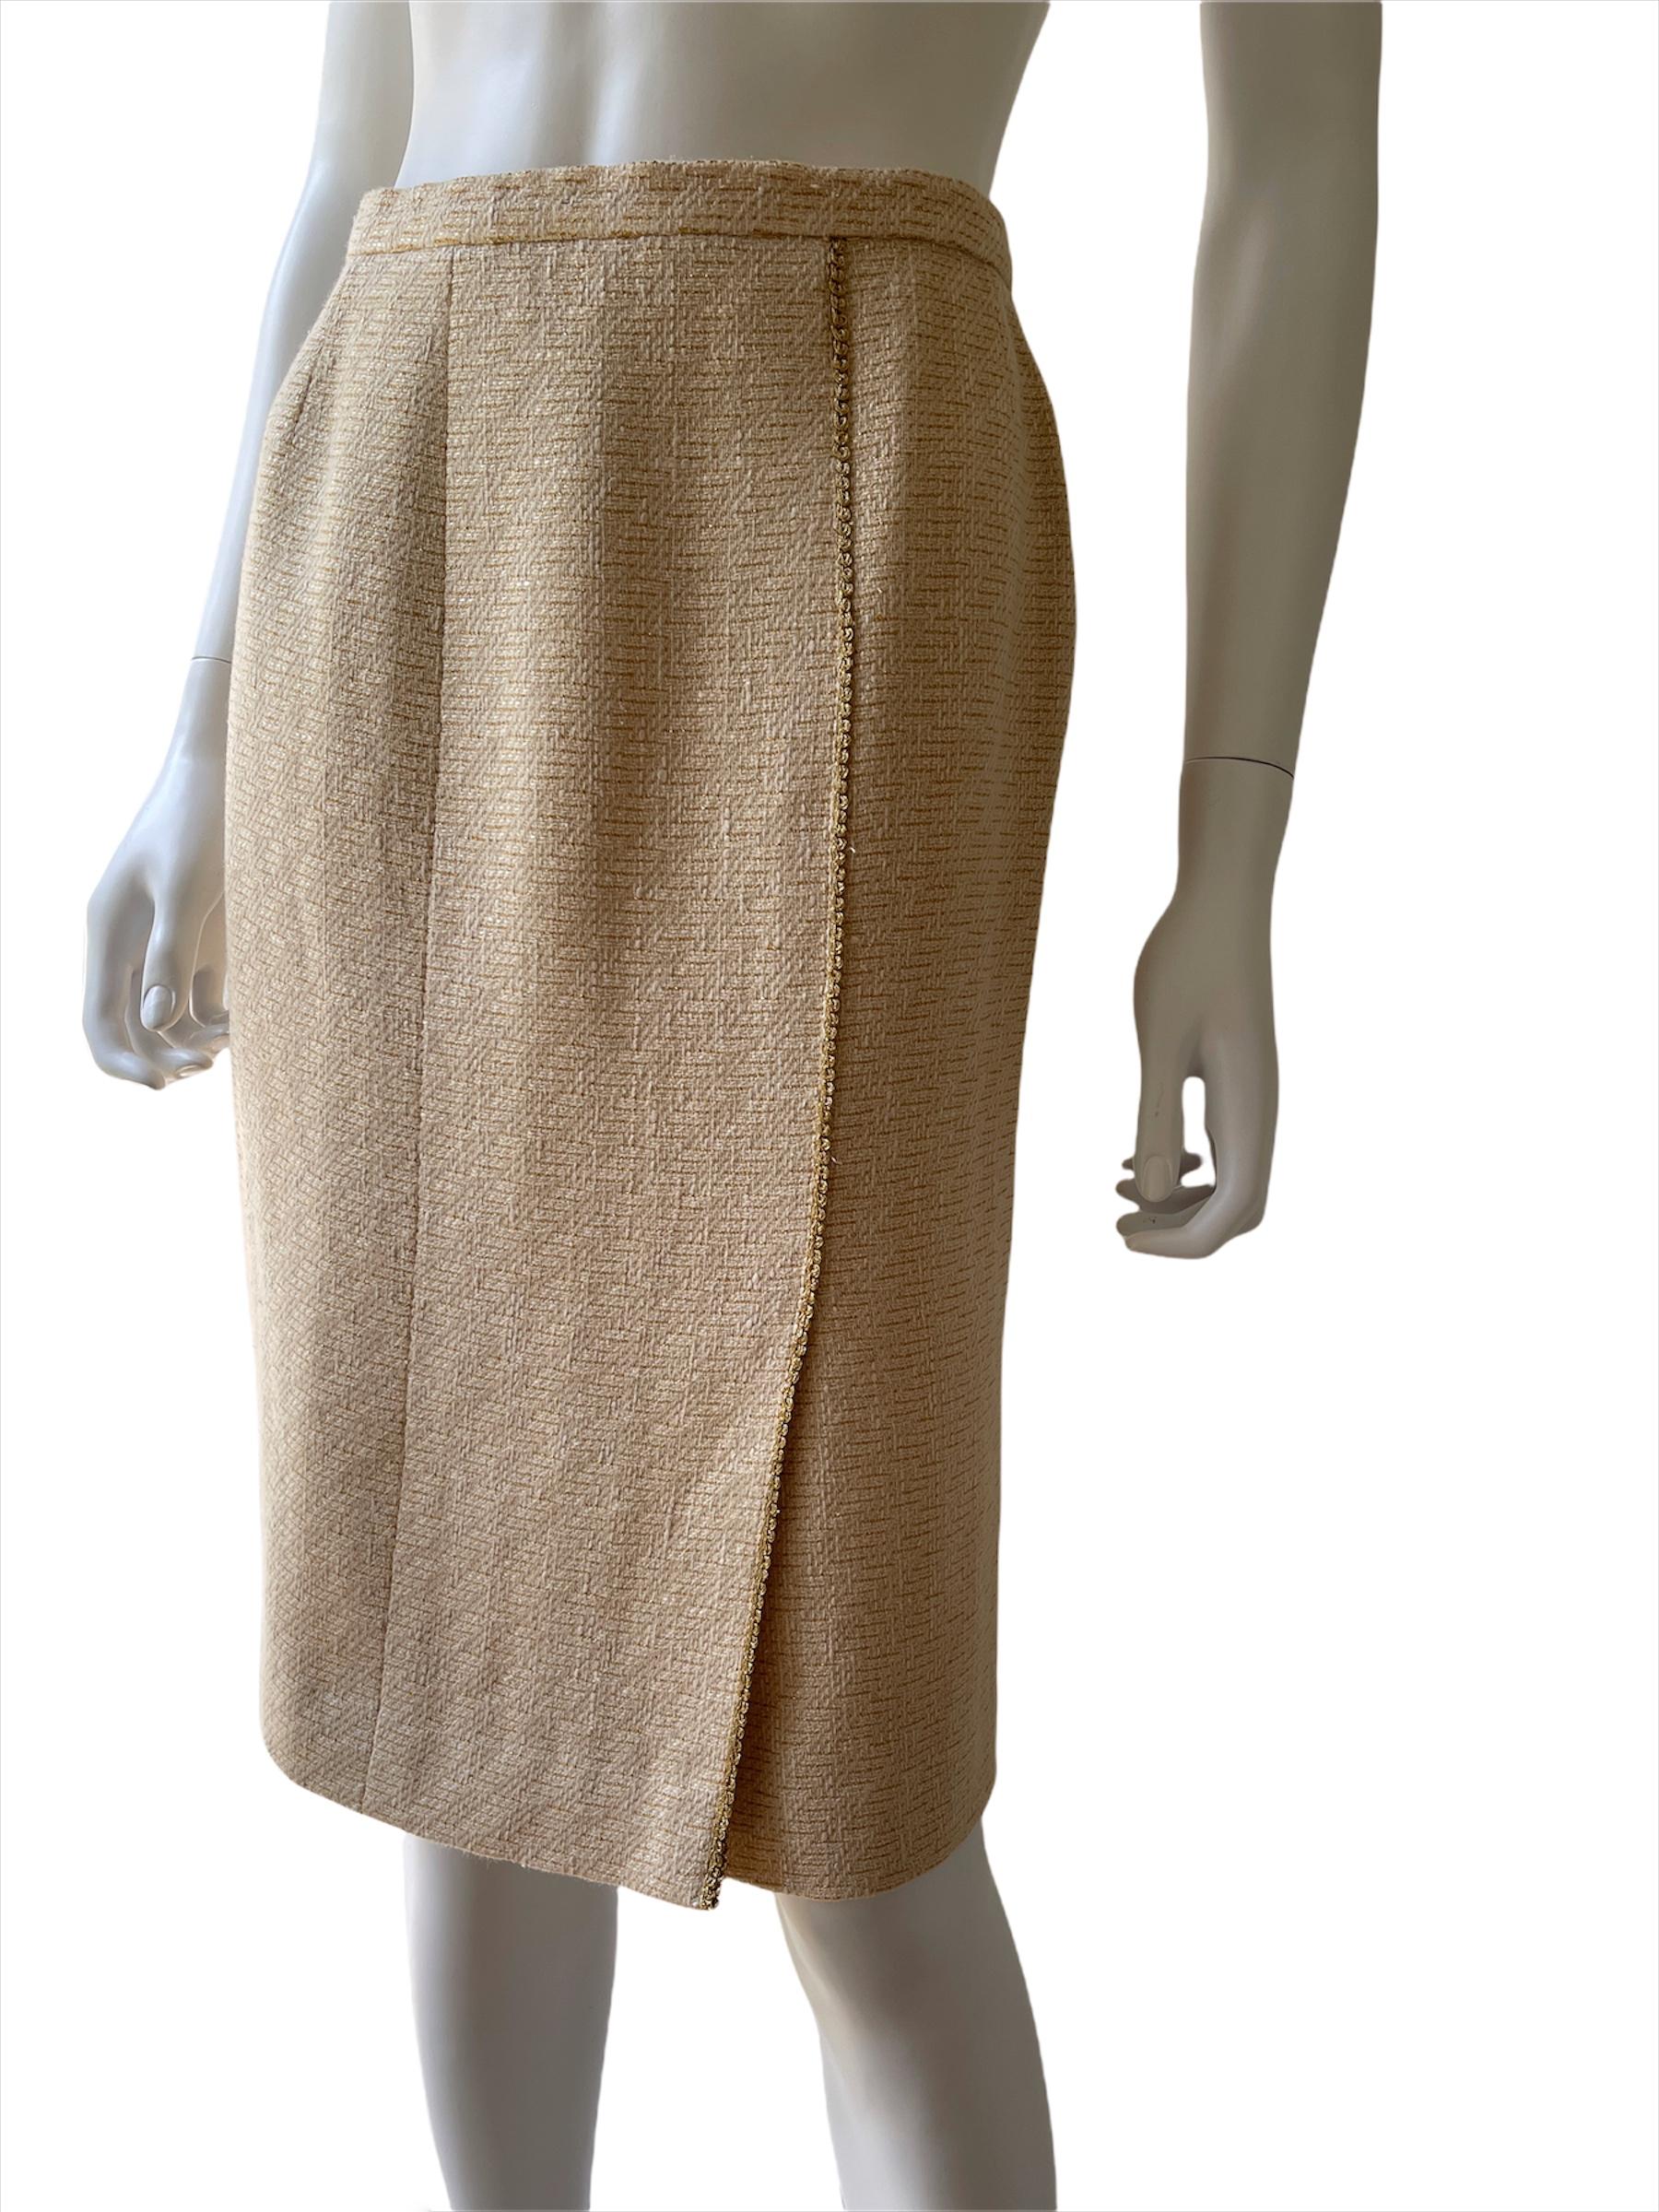 Women's Vintage Chanel Tweed Skirt Suit 2pieces Set Ivory and Gold 